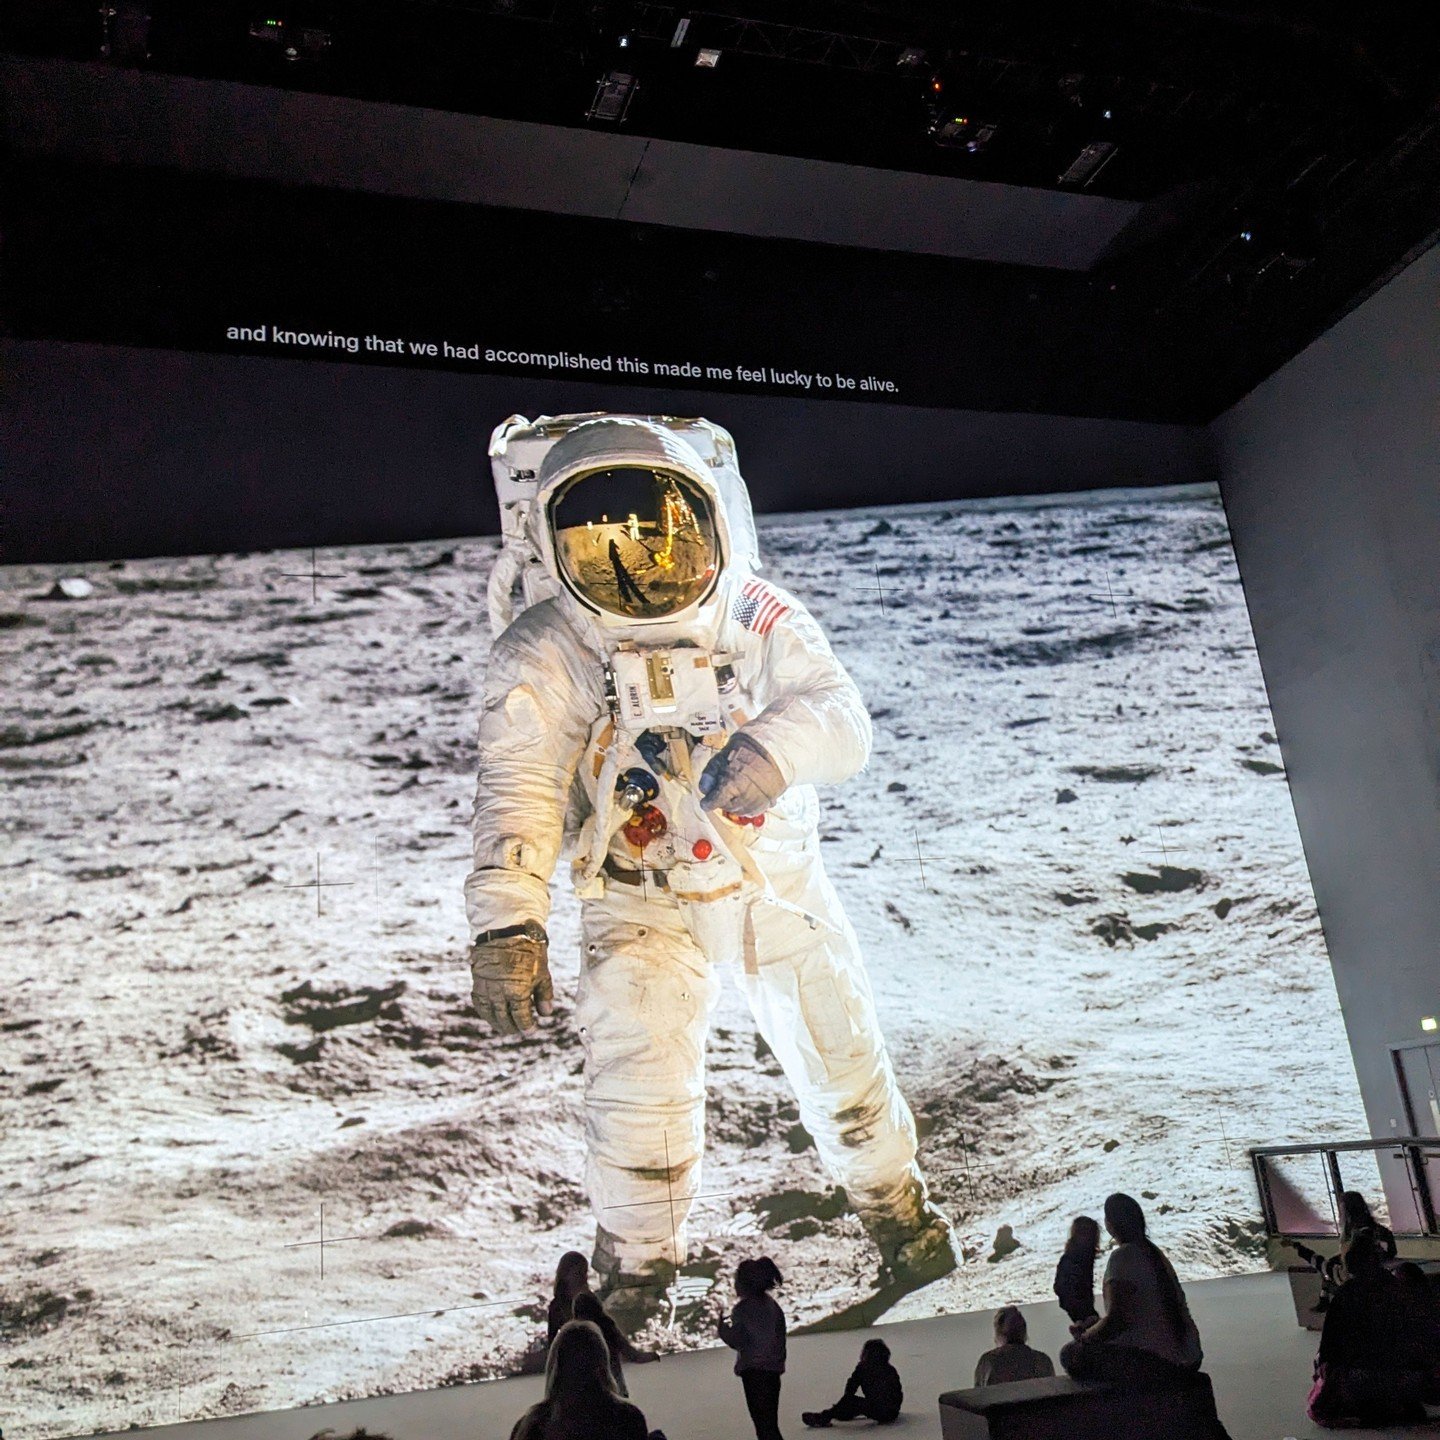 Time to get immersed in space as we look at past journeys to the Moon narrated by Tom Hanks, plus soundbites from the future astronauts planning on travelling to the Earth's natural satellite. Being surrounded by screens is extremely effective; rocke